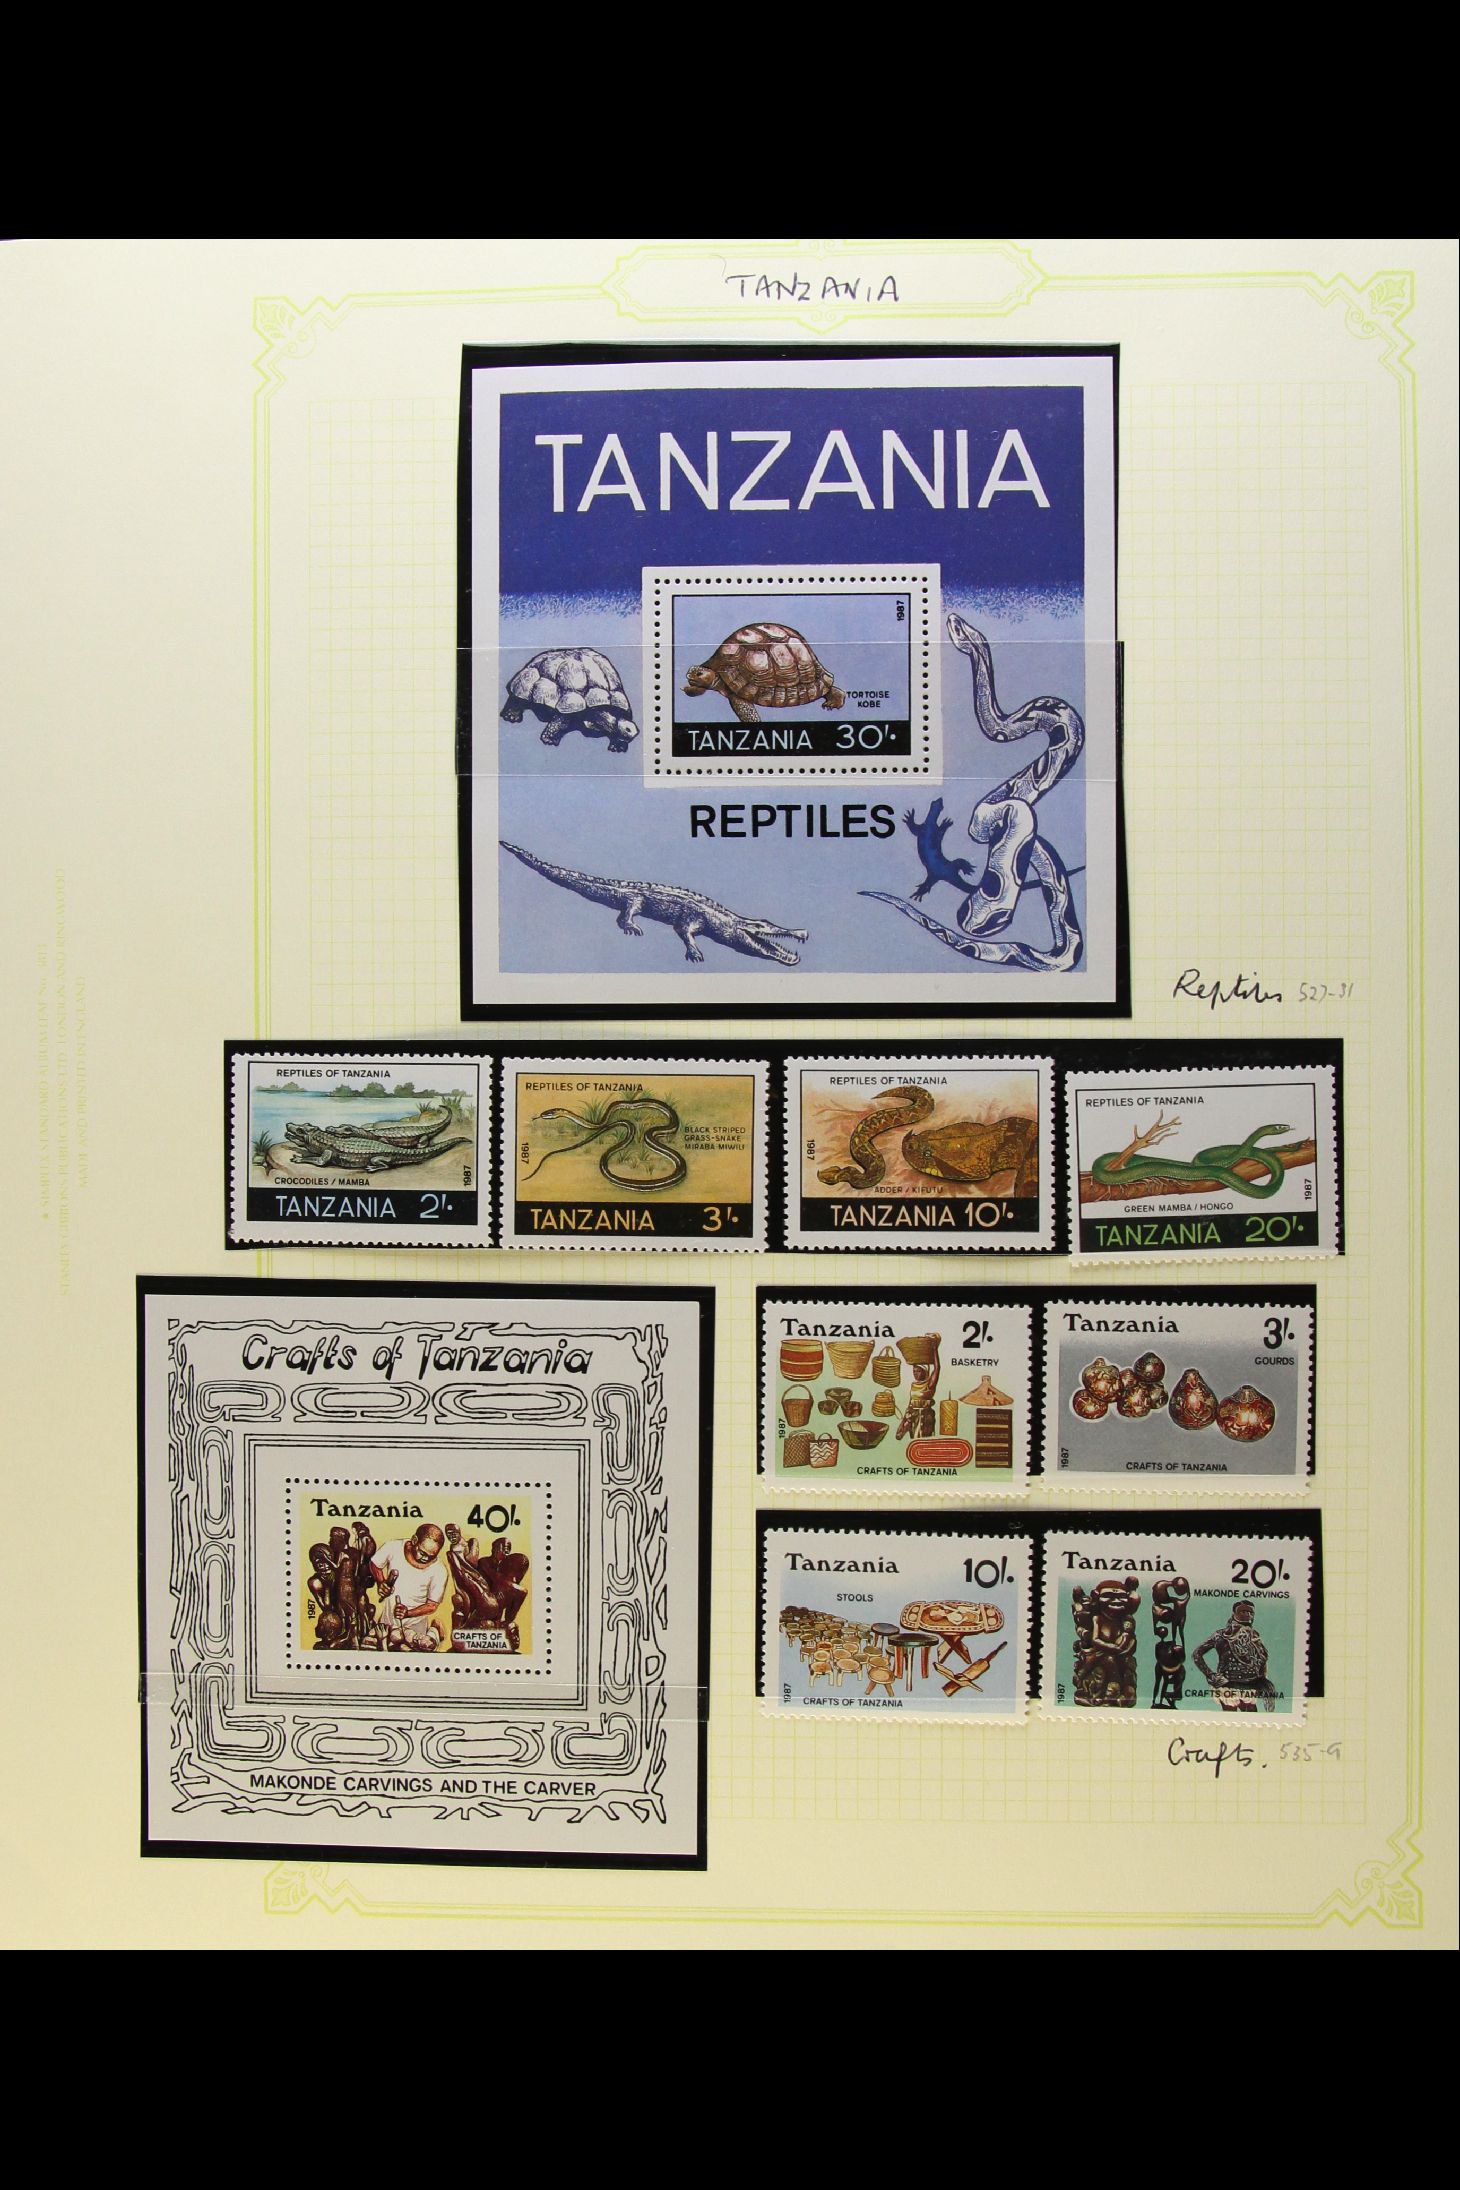 TANZANIA 1983 - 1990 NEVER HINGED MINT COLLECTION on album pages, highly level of completeness for - Image 9 of 15